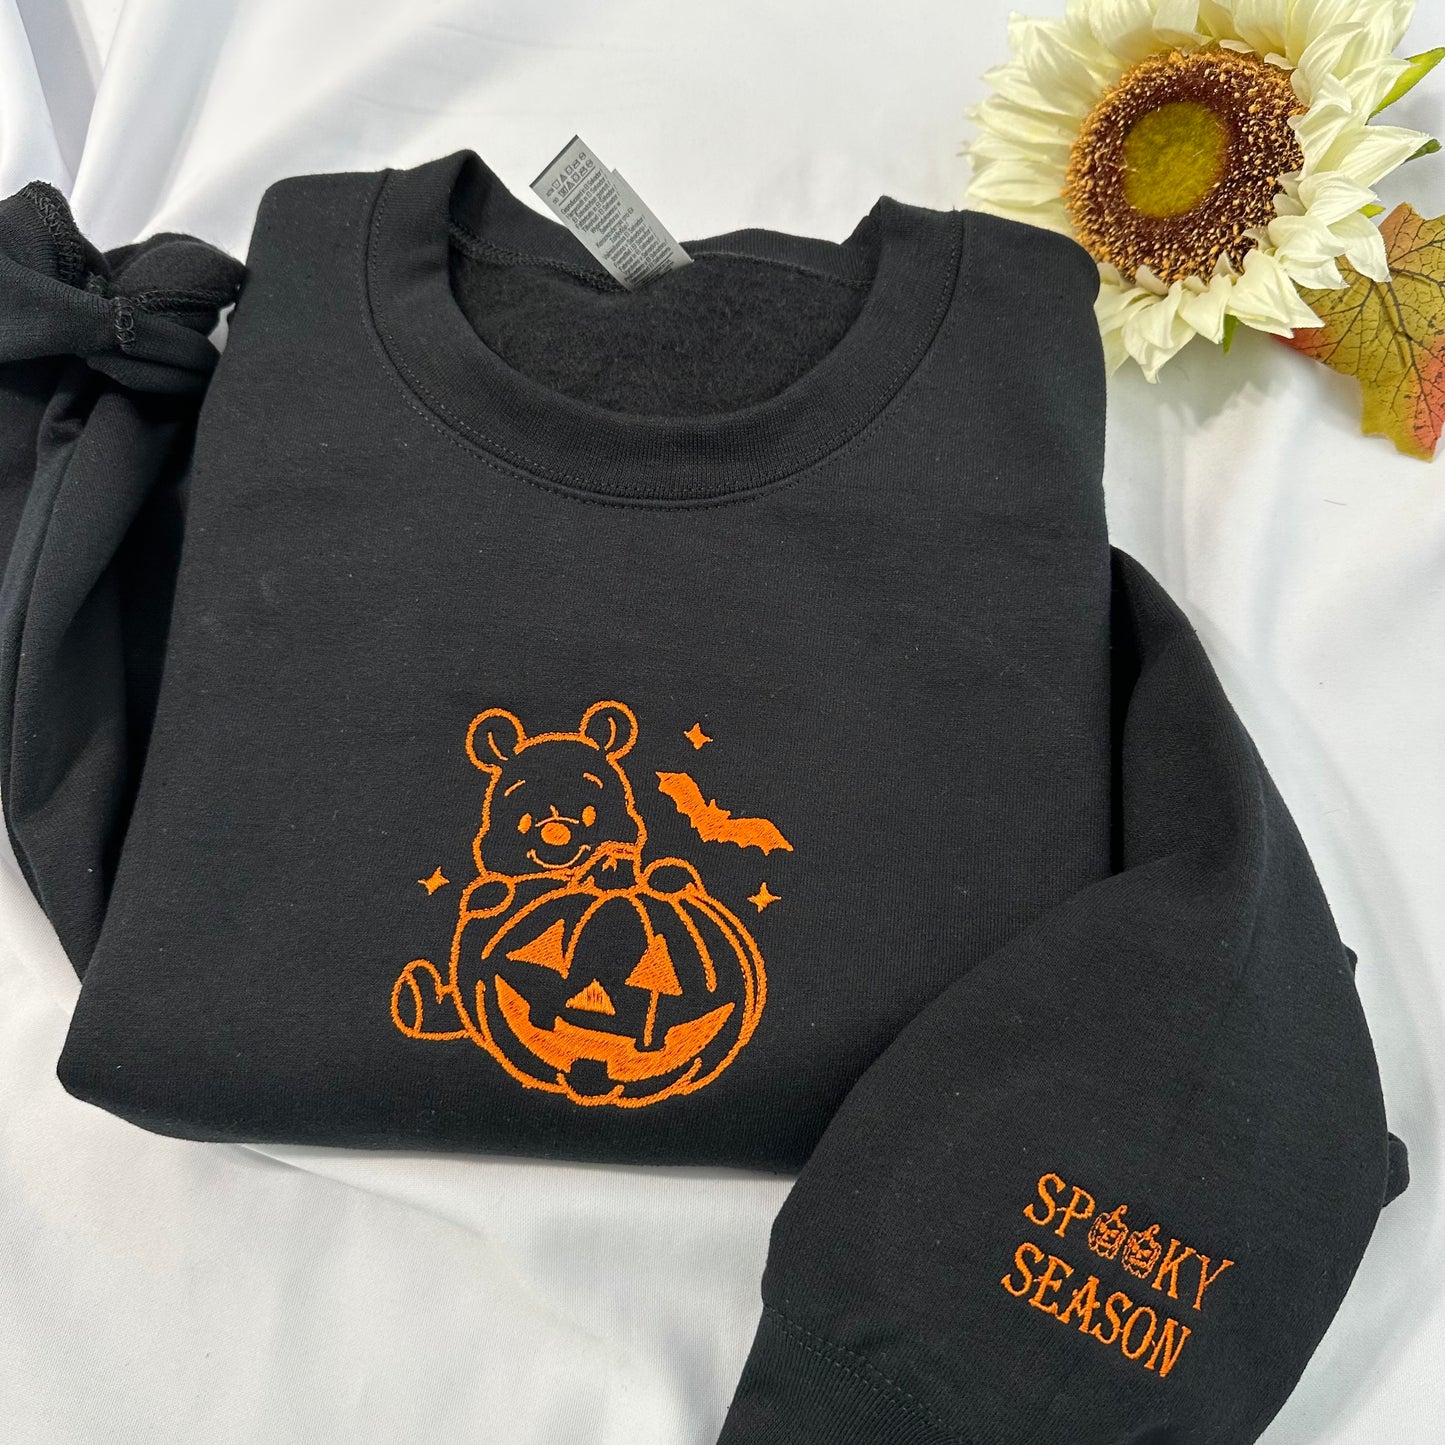 Halloween Winnie the Pooh embroidered sweatshirt with a spooky season embroidered on the cuff; Halloween Pumpkin embroidered sweatshirt